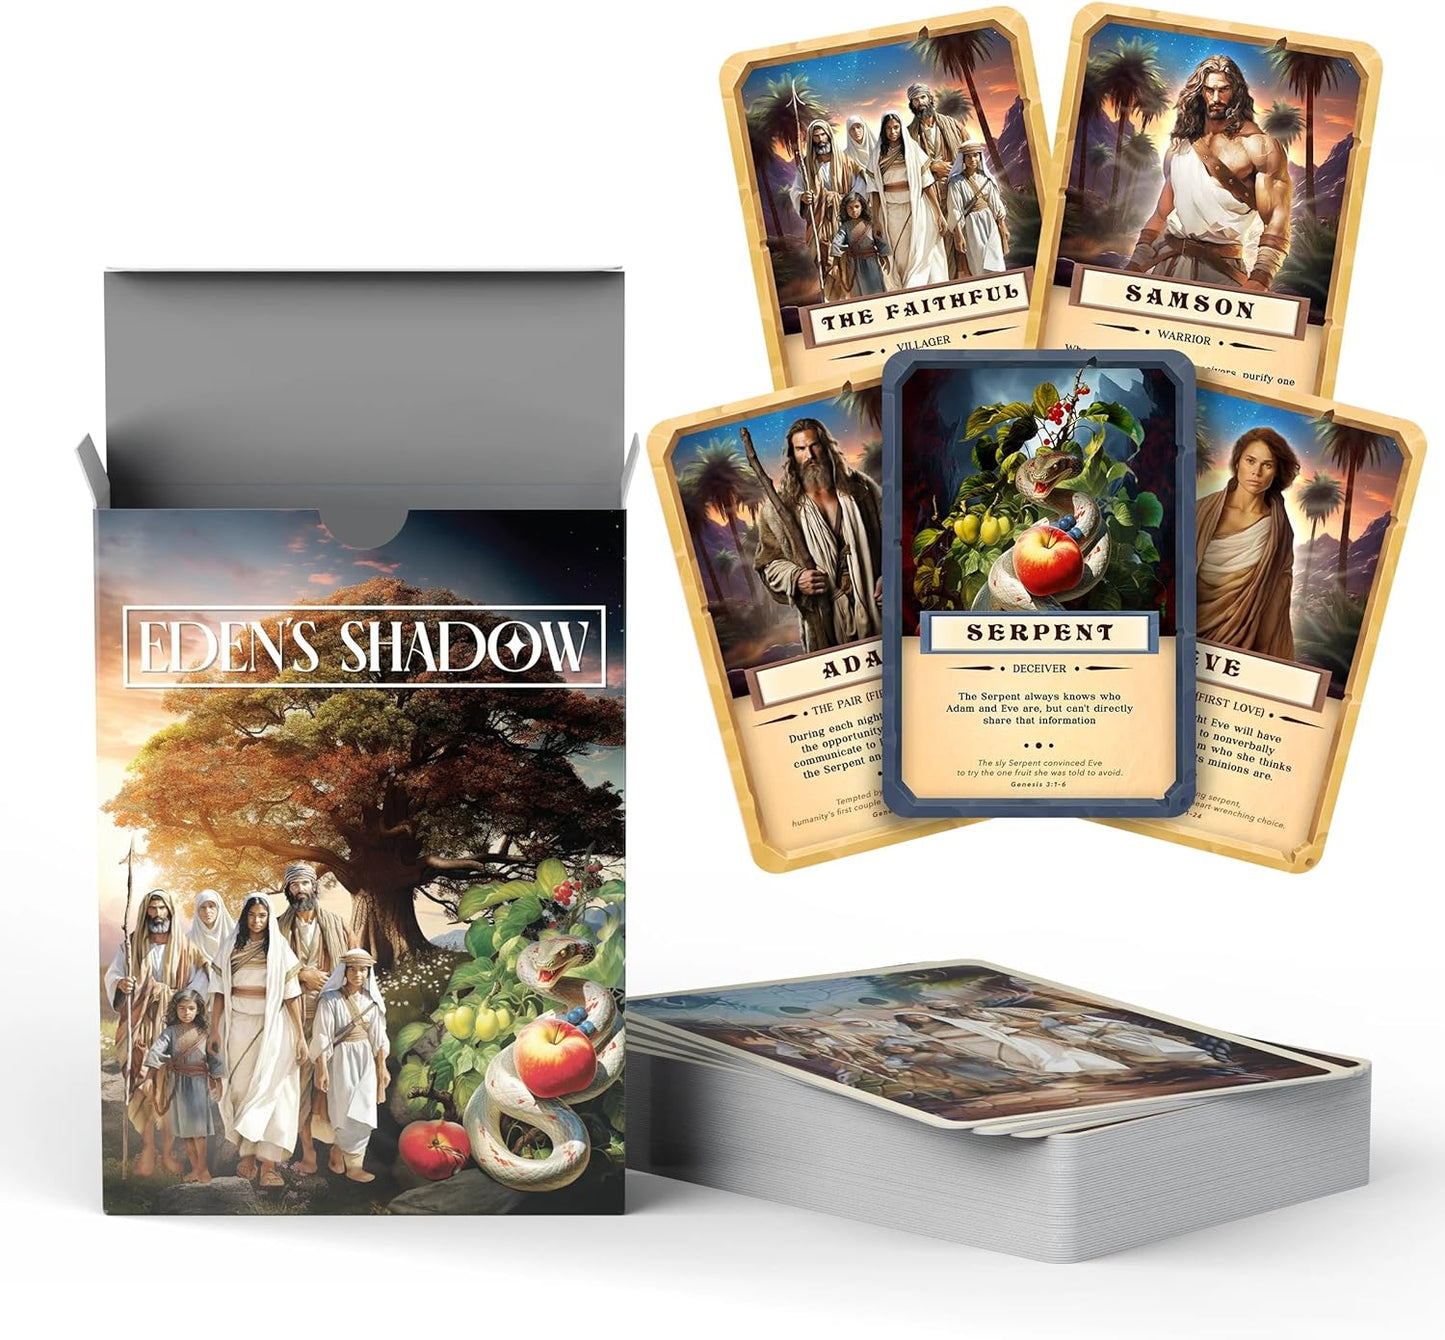 Eden's Shadow. A Christian Board Game for Youth Groups, Sleepovers, Slumber Parties and Bible Study Groups. Fun, Interactive Party Play with Social Inference, Role Play, Bluffing and Beautiful Cards claimedbygoddesigns